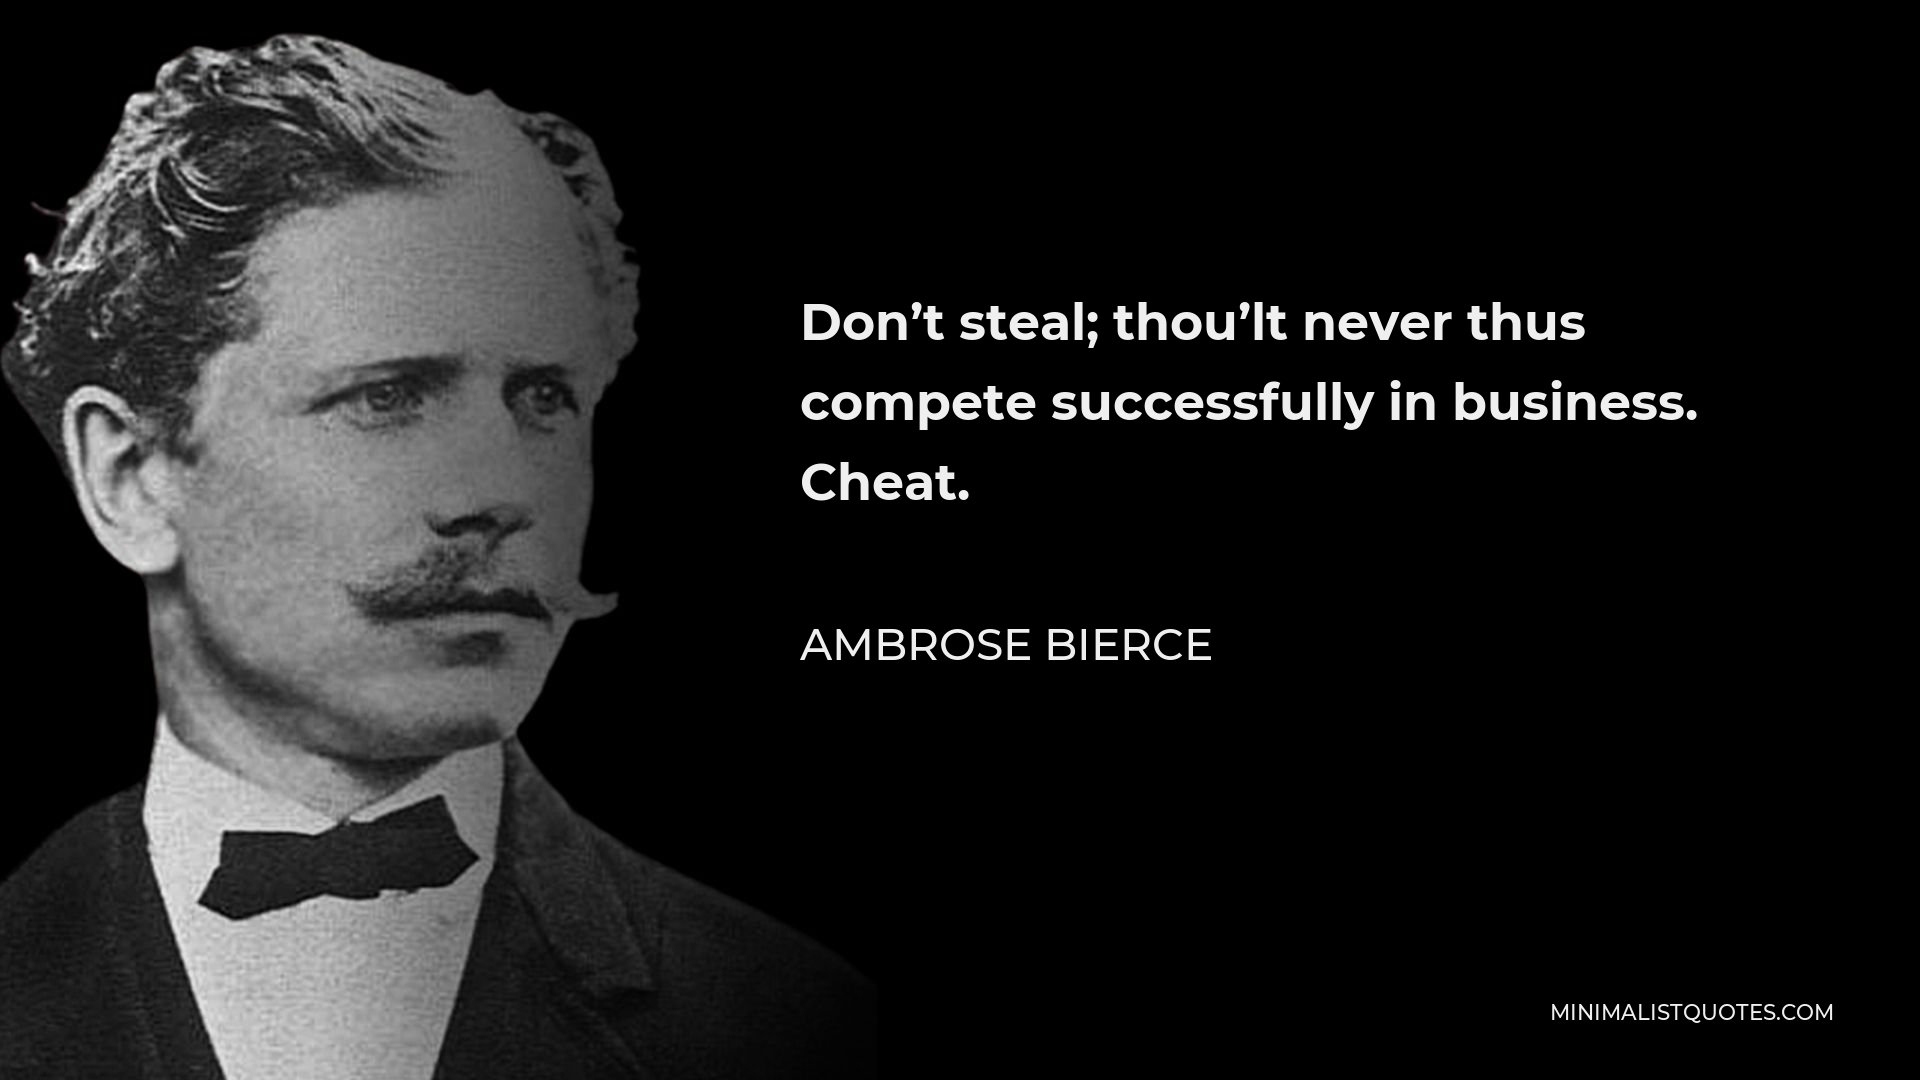 Ambrose Bierce Quote - Don’t steal; thou’lt never thus compete successfully in business. Cheat.